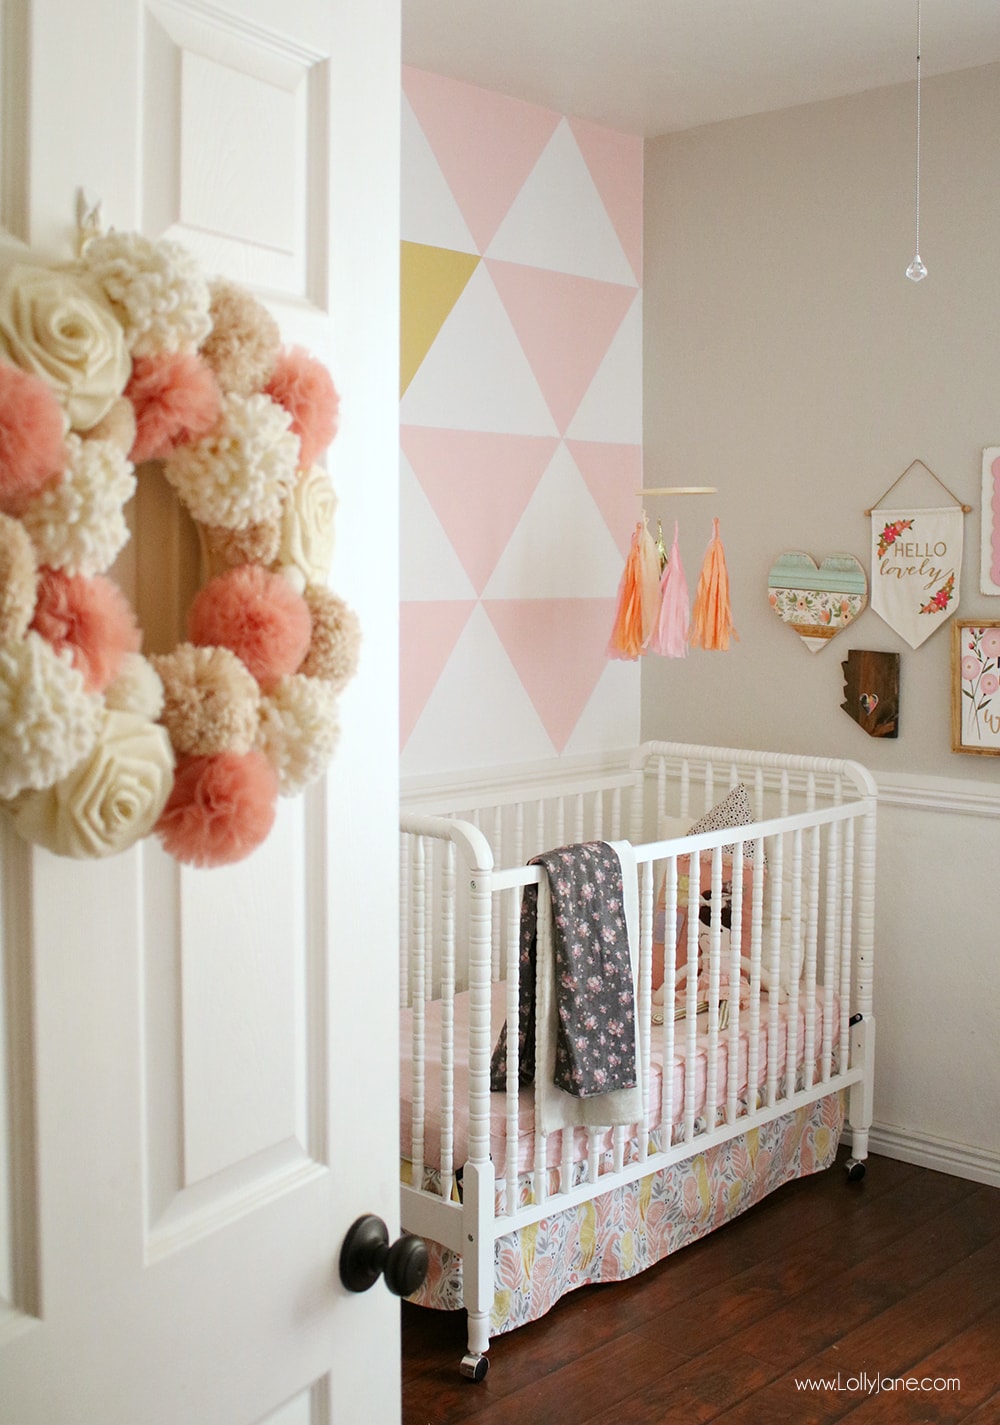 Painted Triangle Accent Wall Tutorial An Easy Wall Of Art Lolly Jane,Climbing Hydrangea Trellis